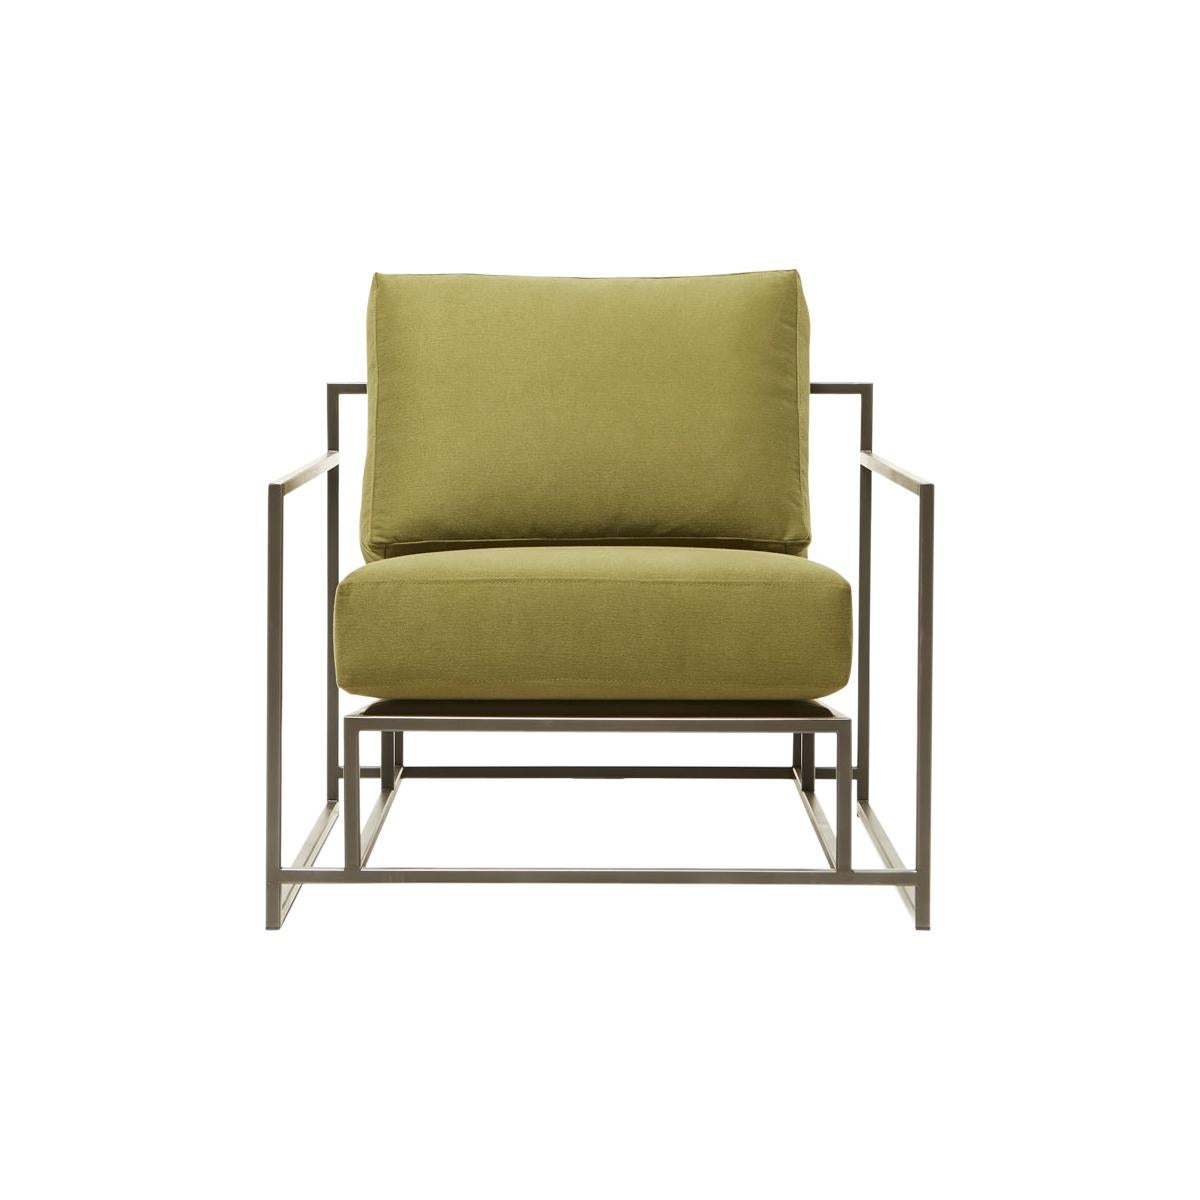 Olive Twill Canvas and Blackened Steel Armchair